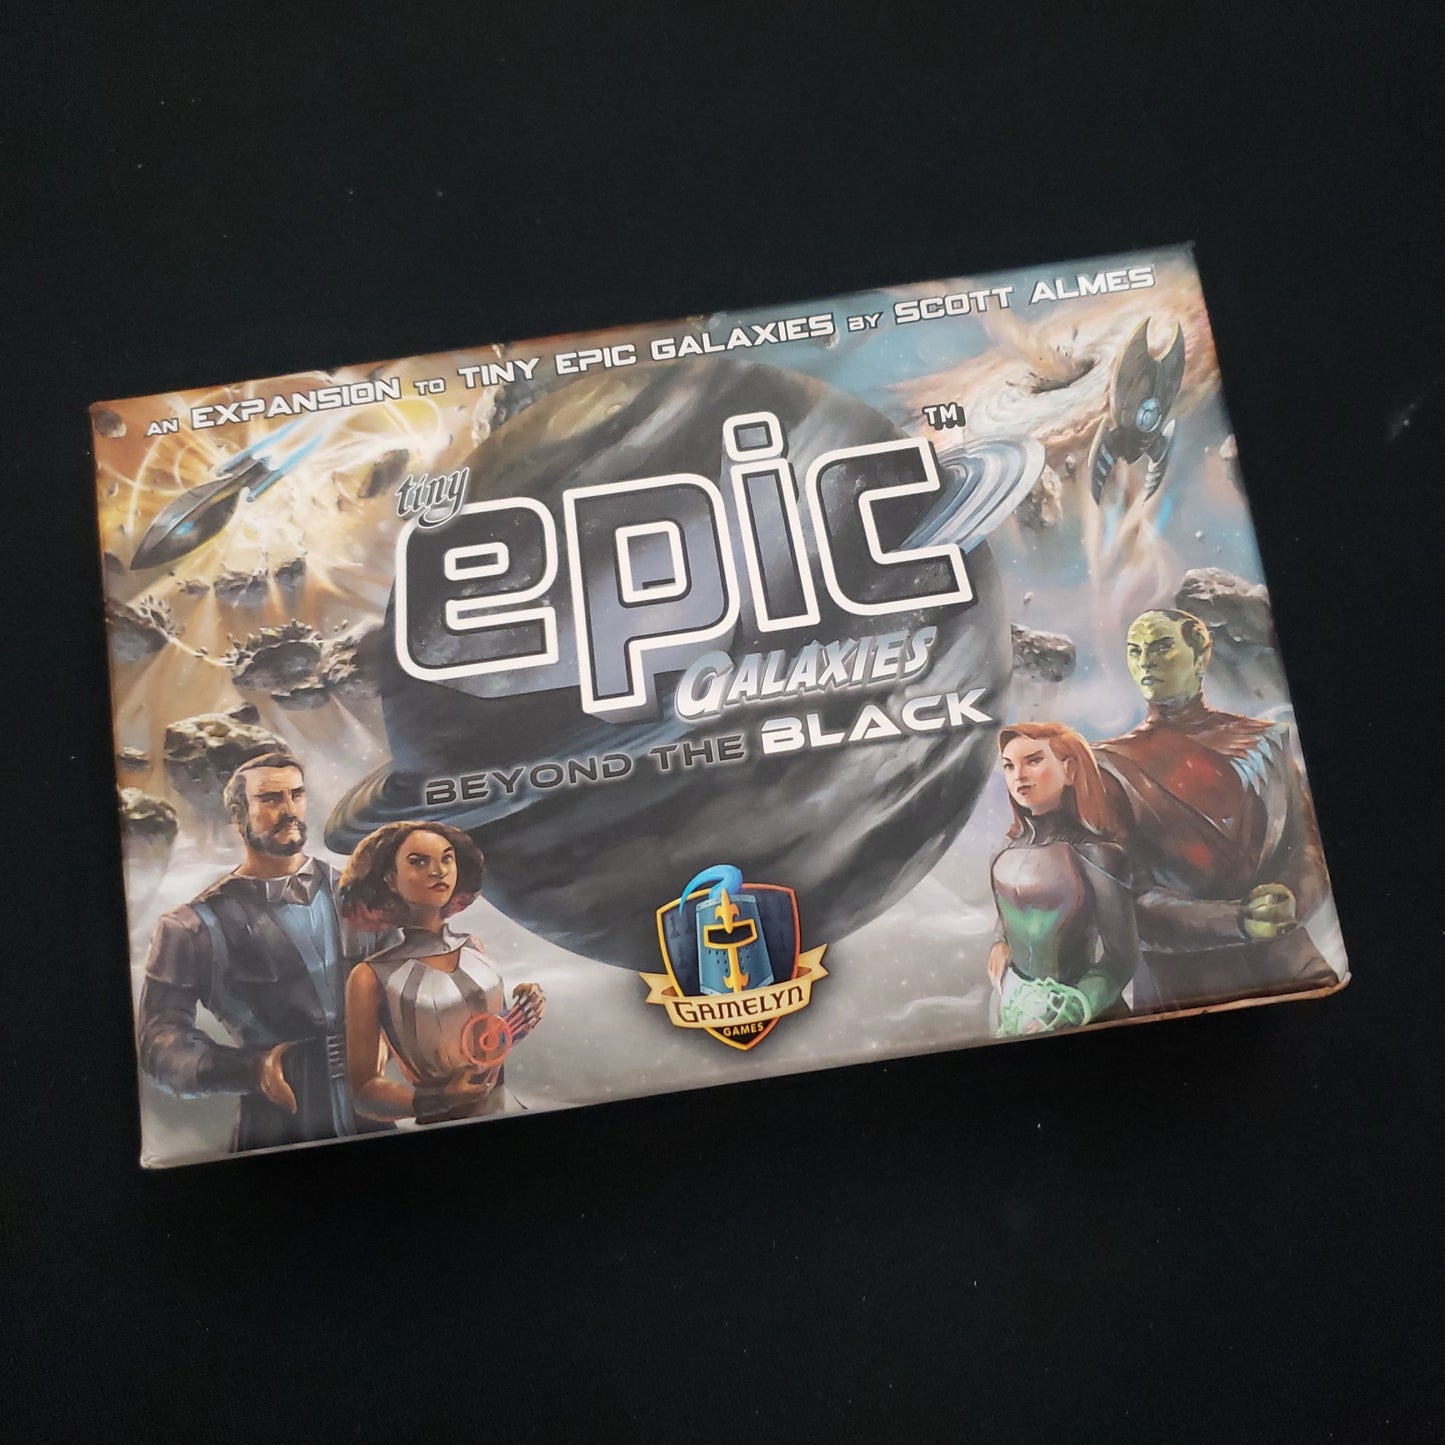 Image shows the front cover of the box of the Beyond the Black expansion for the board game Tiny Epic Galaxies